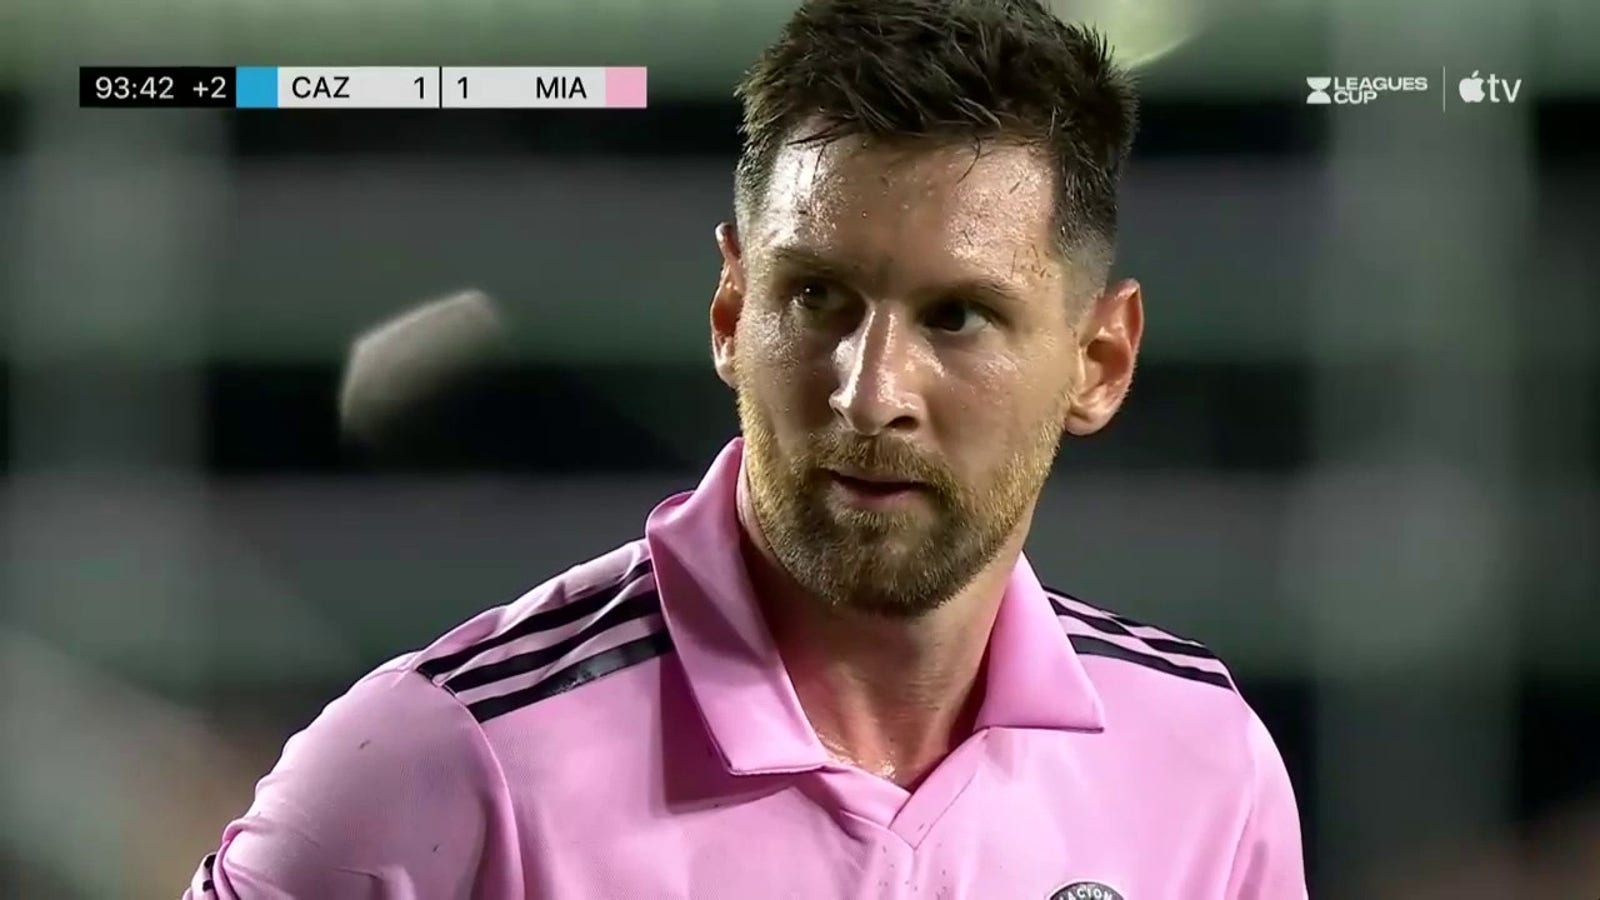 Lionel Messi drills a ridiculous free kick in his inaugural match with Inter Miami CF